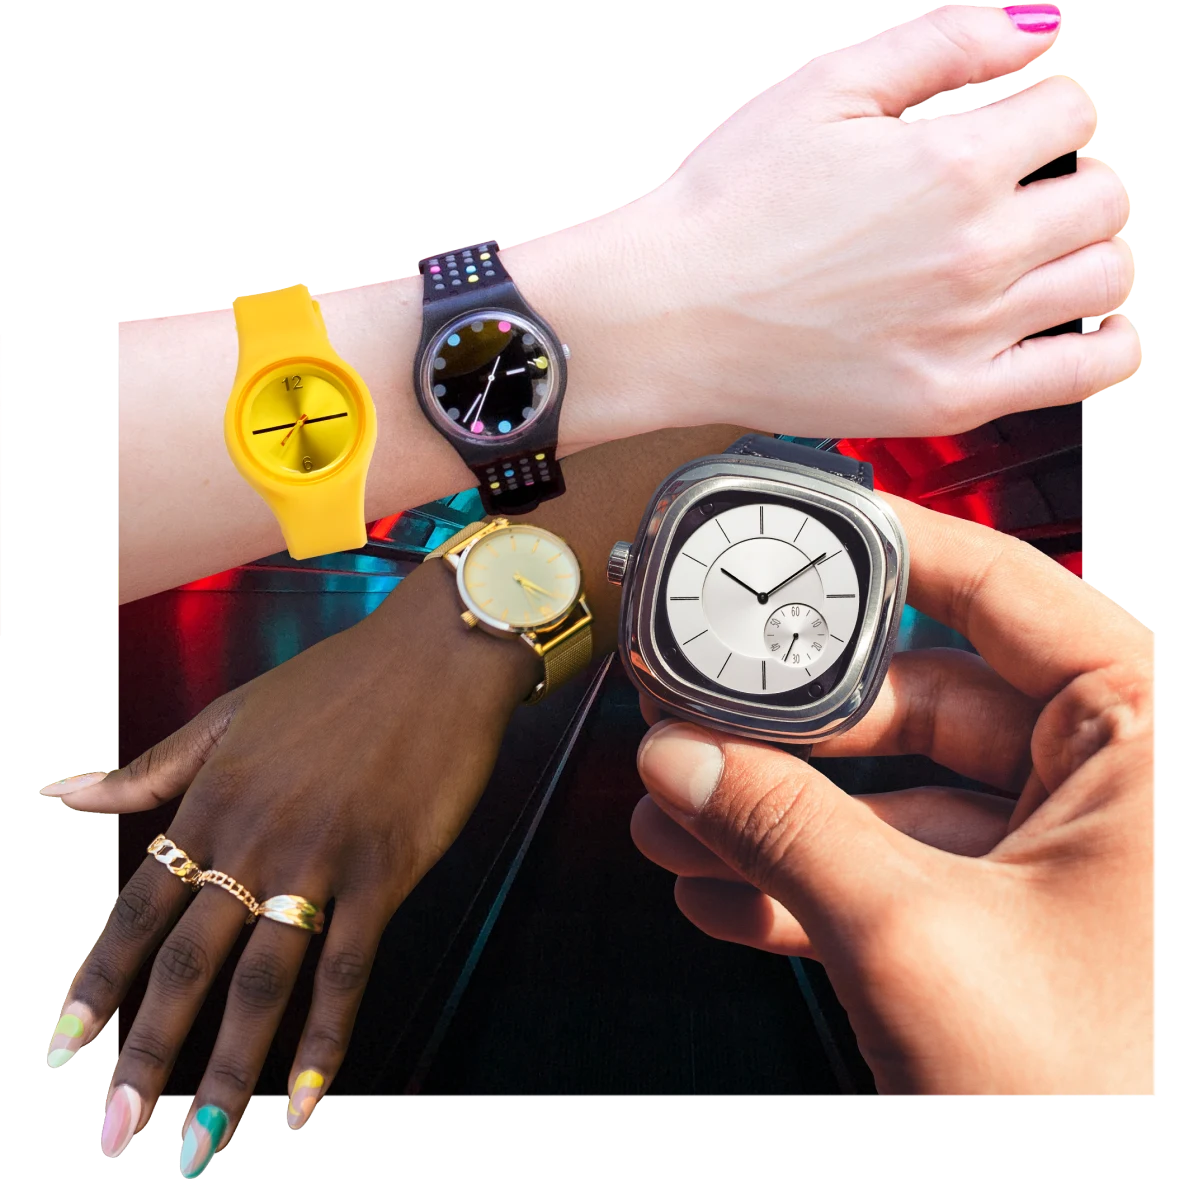 Two wrists sporting yellow, black and gold watches. Hand holding a silver watch.